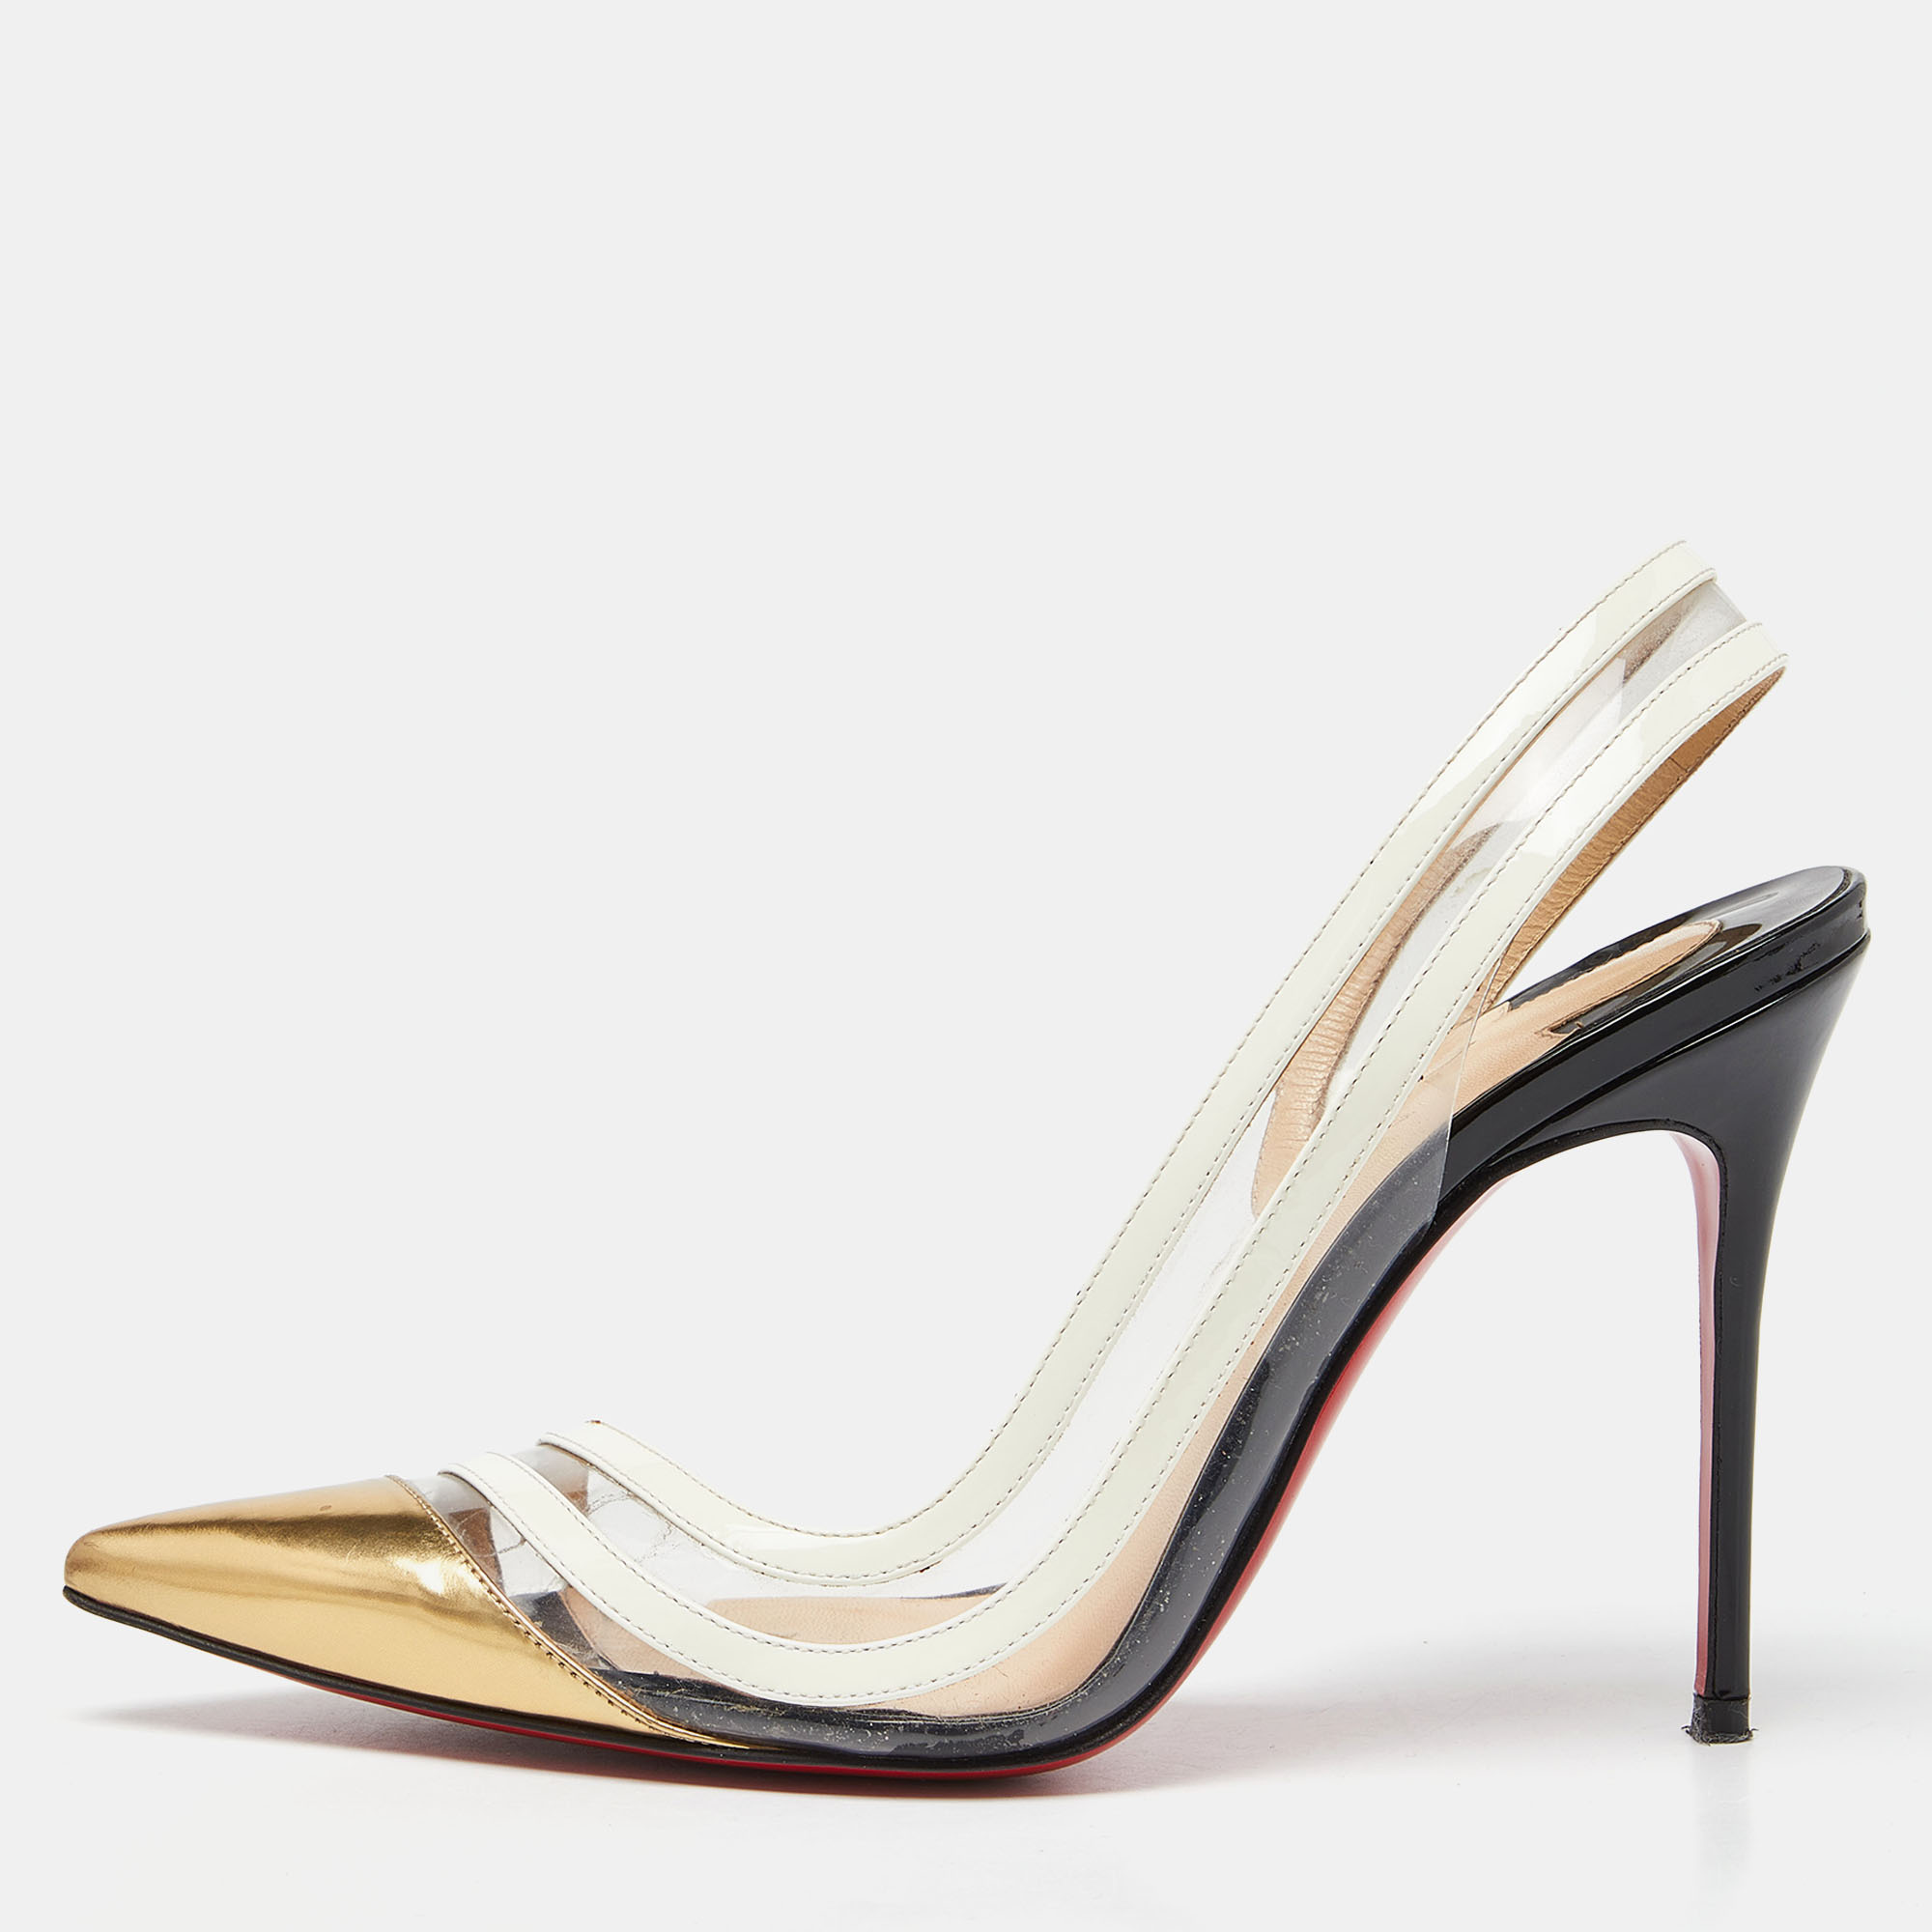 Christian louboutin tri color patent leather and pvc paralili slingback pumps size 37.5